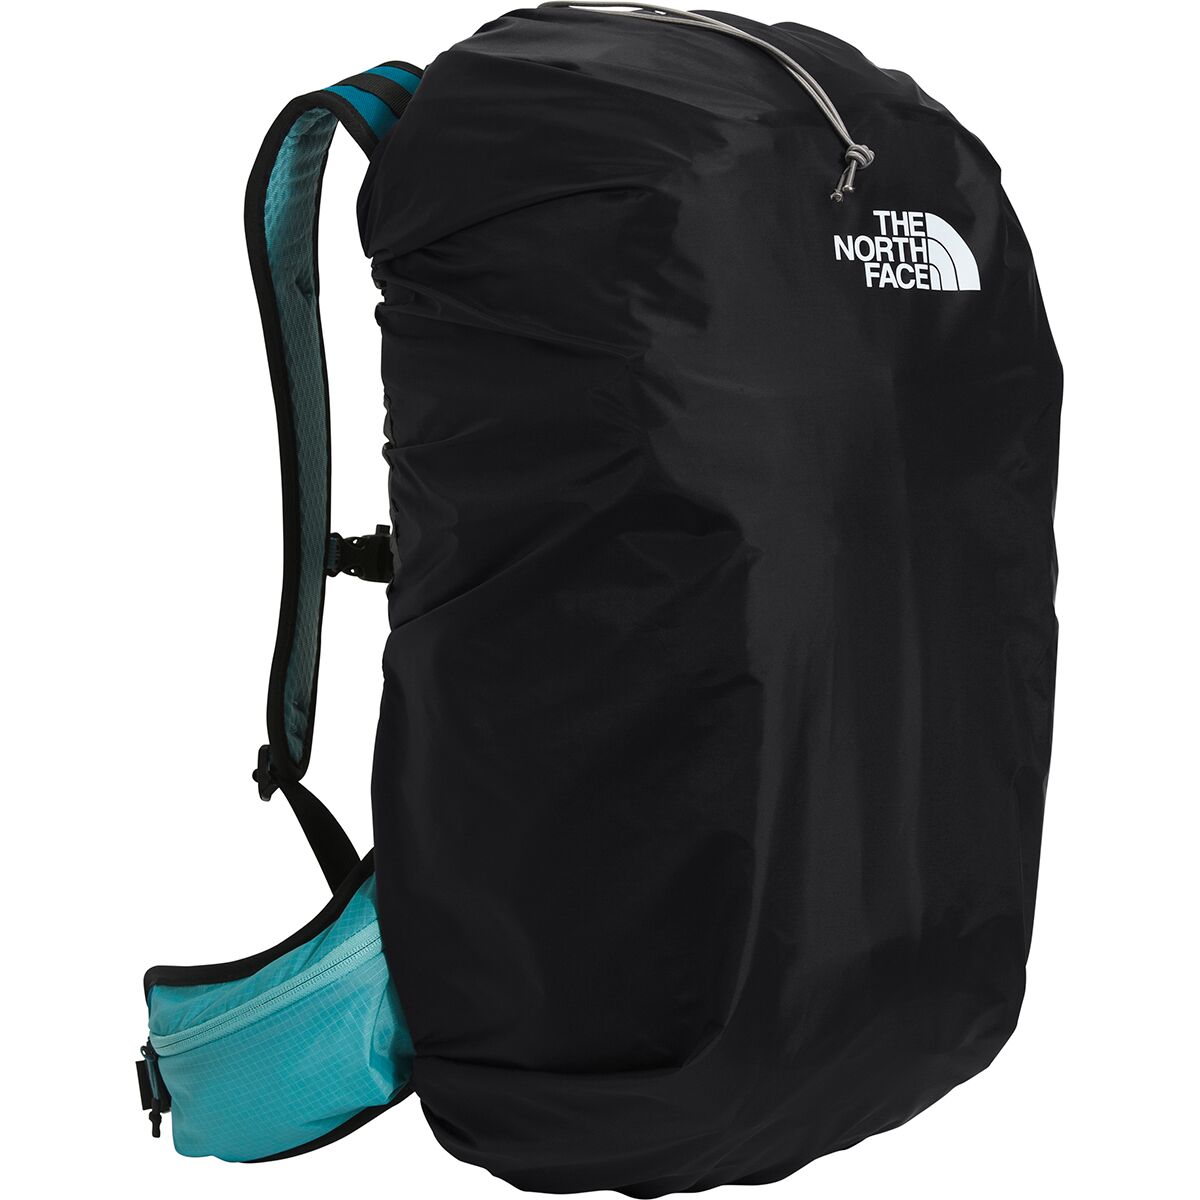 The Face Backpack Rain Cover - Hike